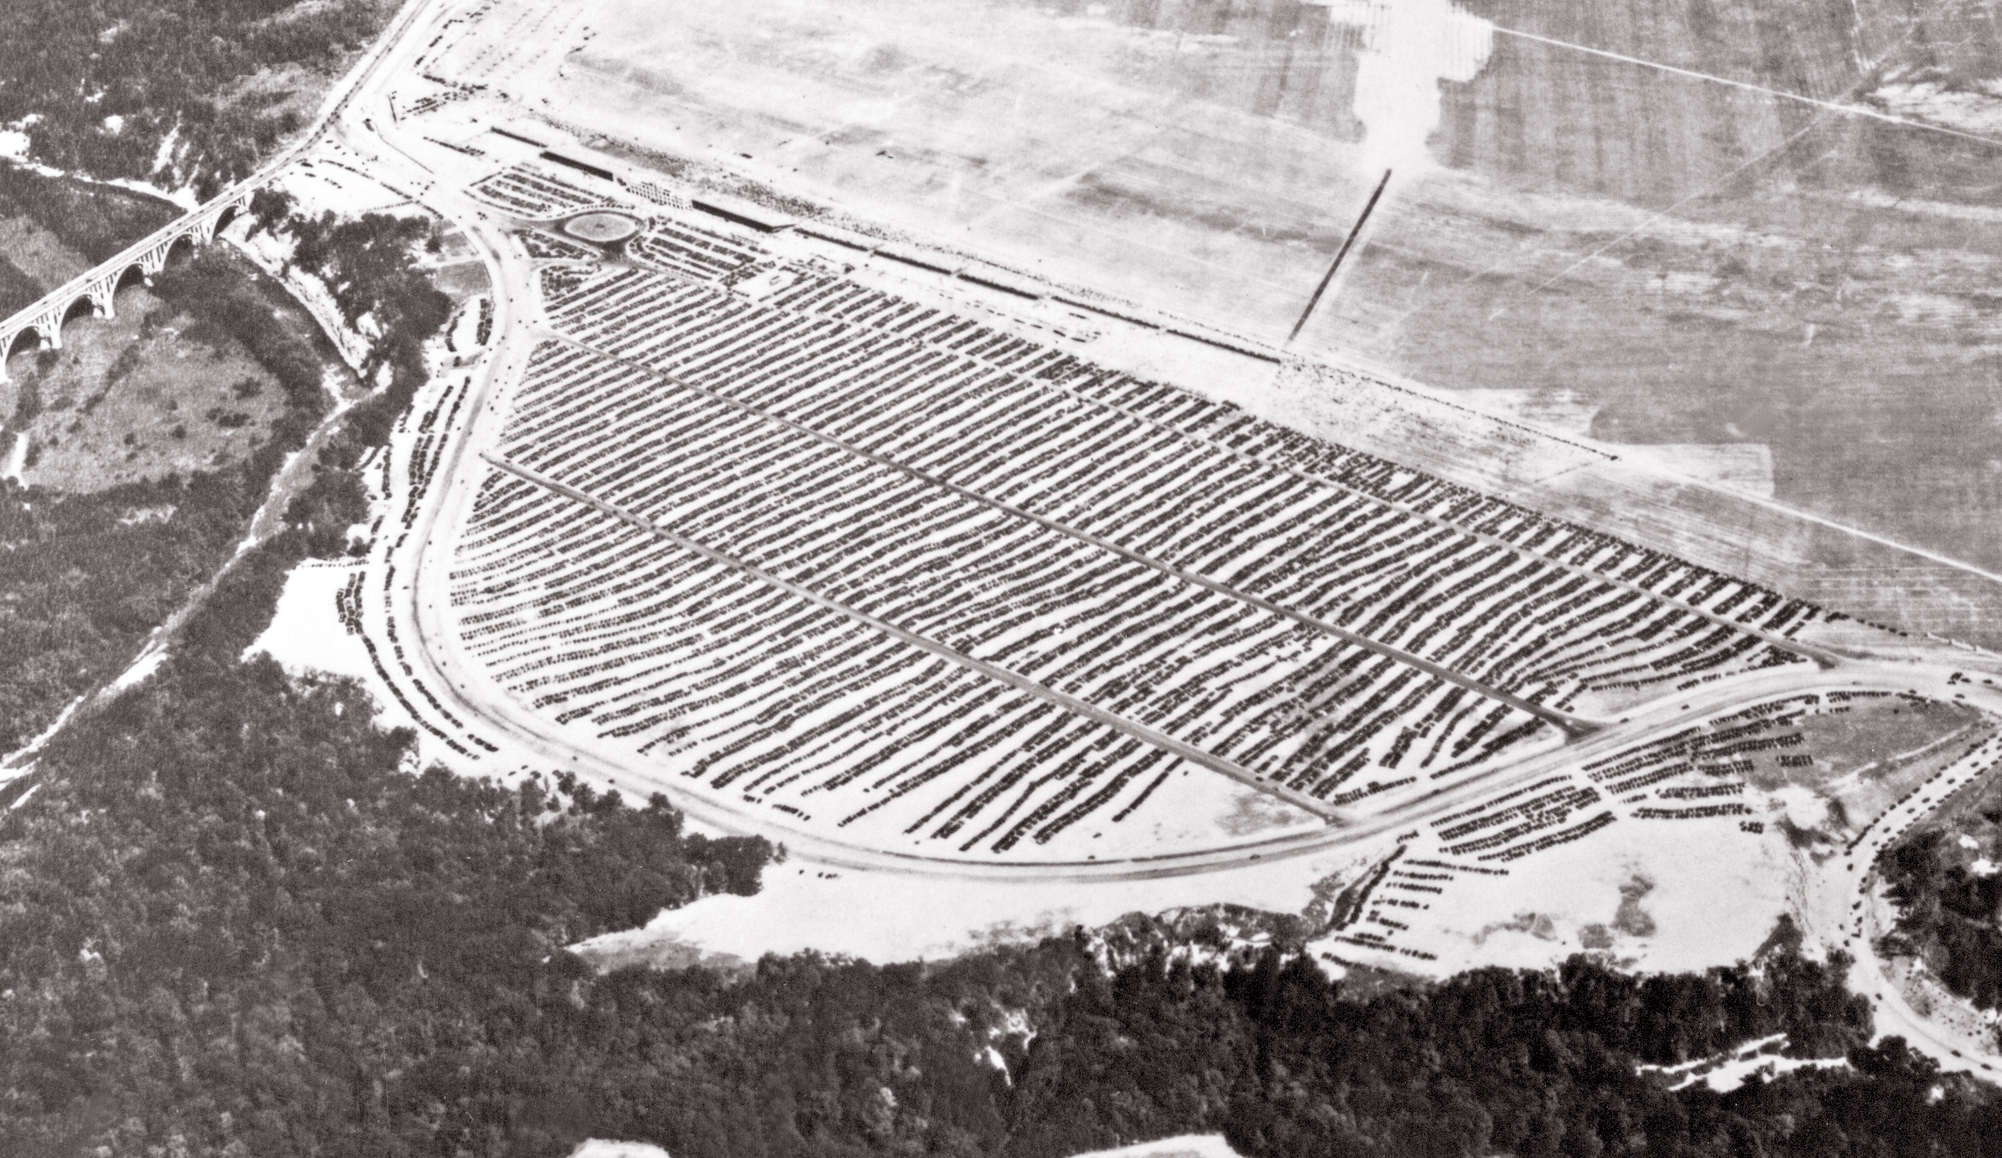 Aerial view of the future site of Glenn Research Center